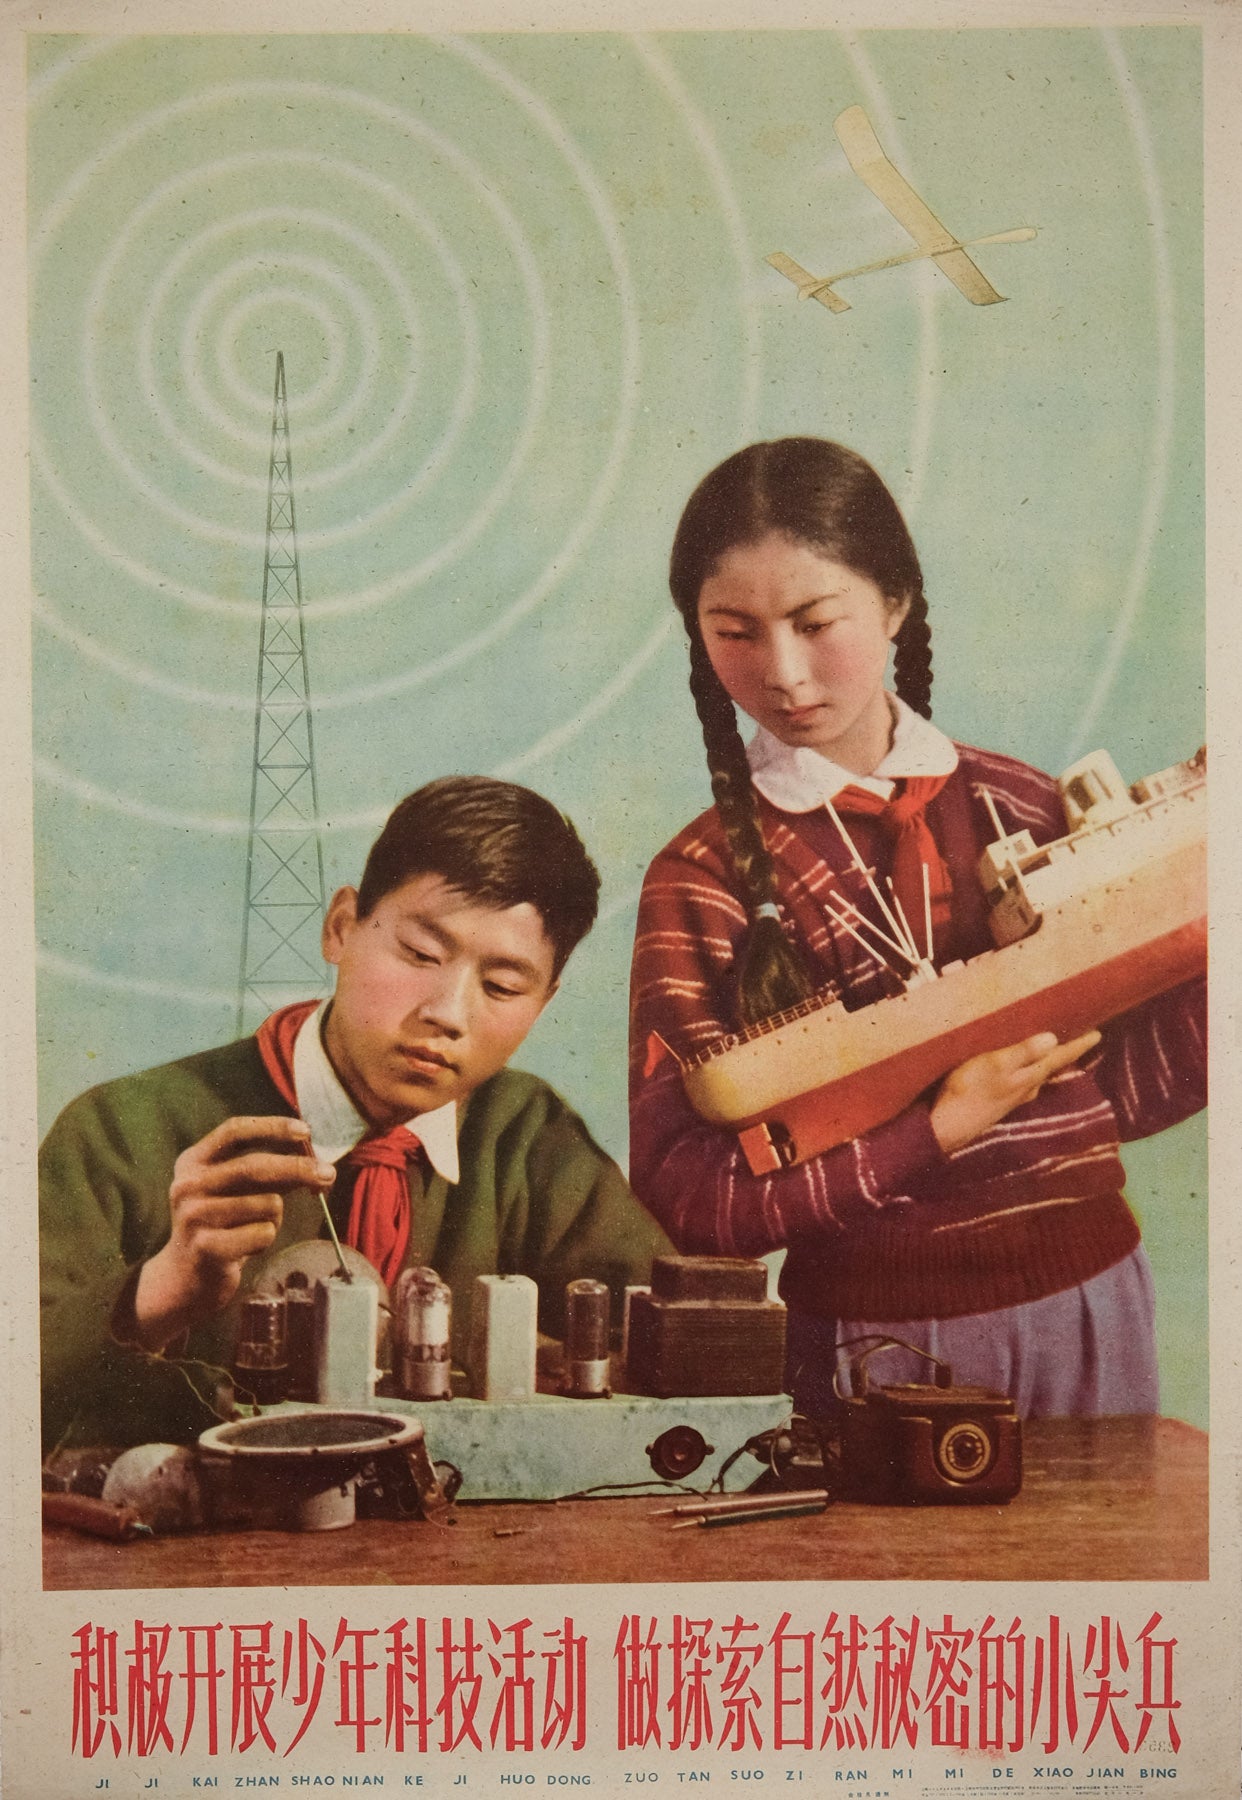 image of the original vintage 1960 Chinese communist propaganda poster by Jin Guiquan titled Actively develop youth scientific activities, become a young pioneer exploring the wonders of science published by Shanghai People's Fine Art Publishing House